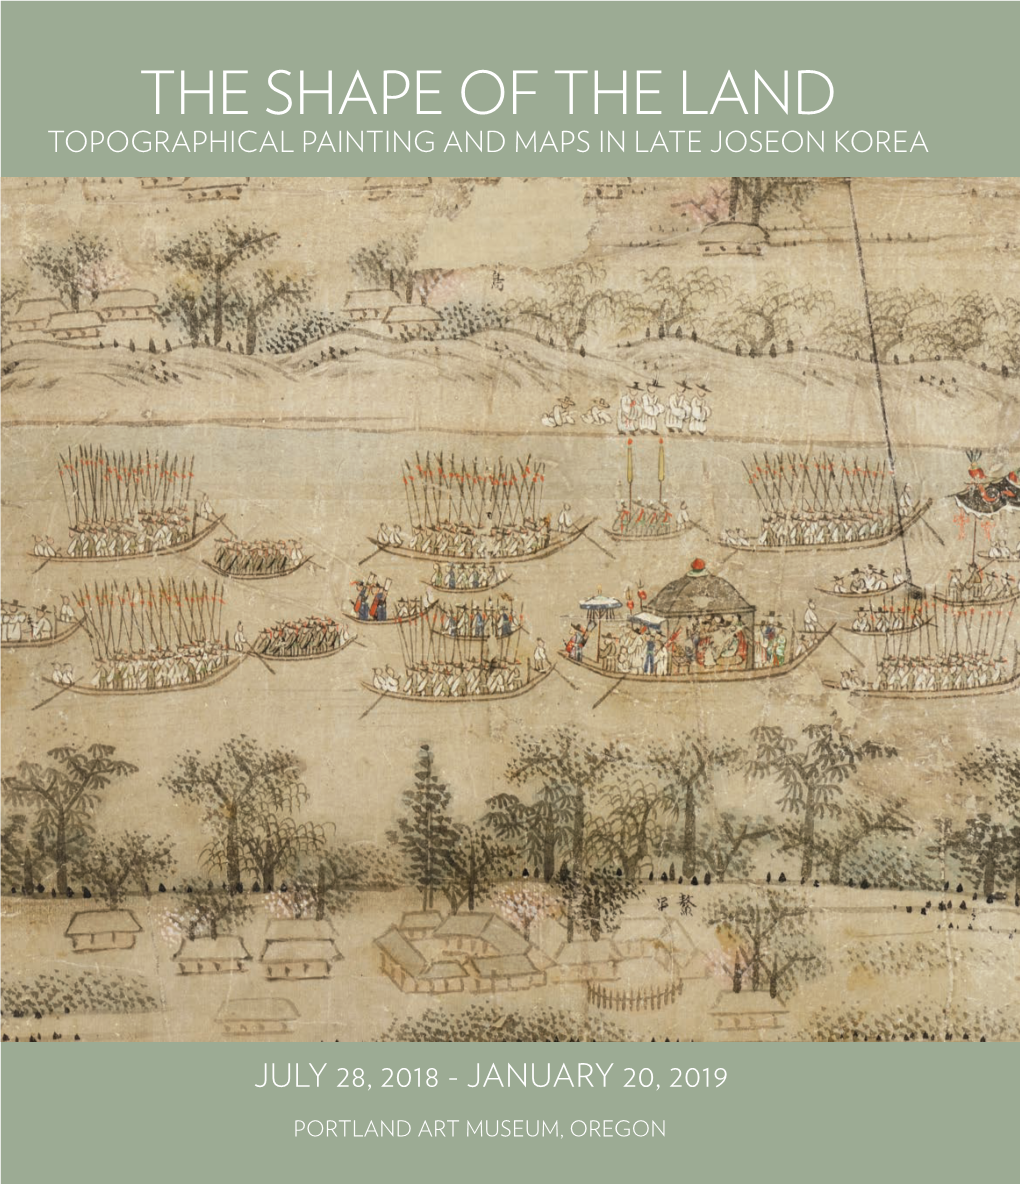 The Shape of the Land: Topographical Painting and Maps in Late Joseon